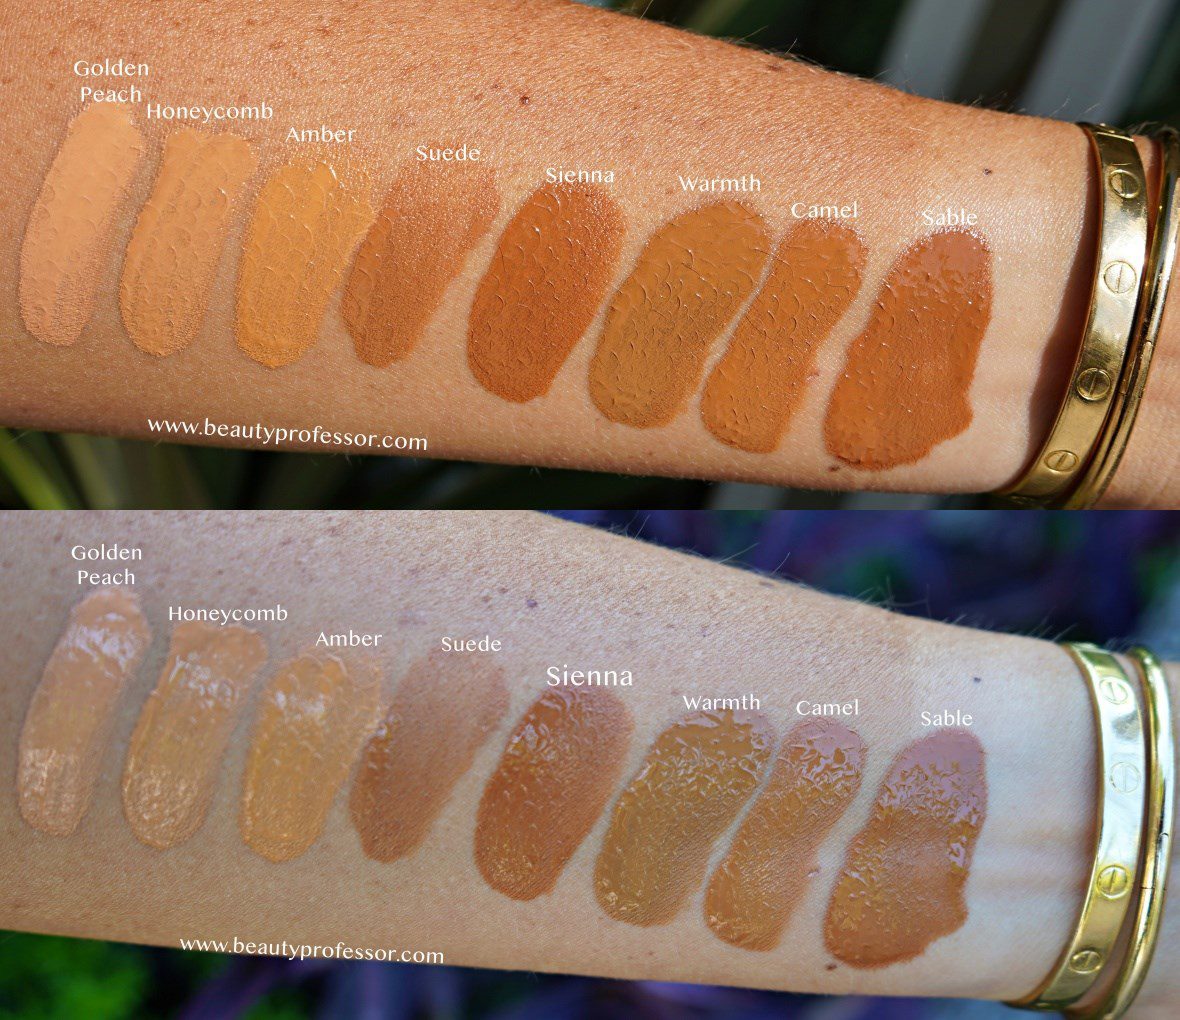 lawless foundation swatches on the arm